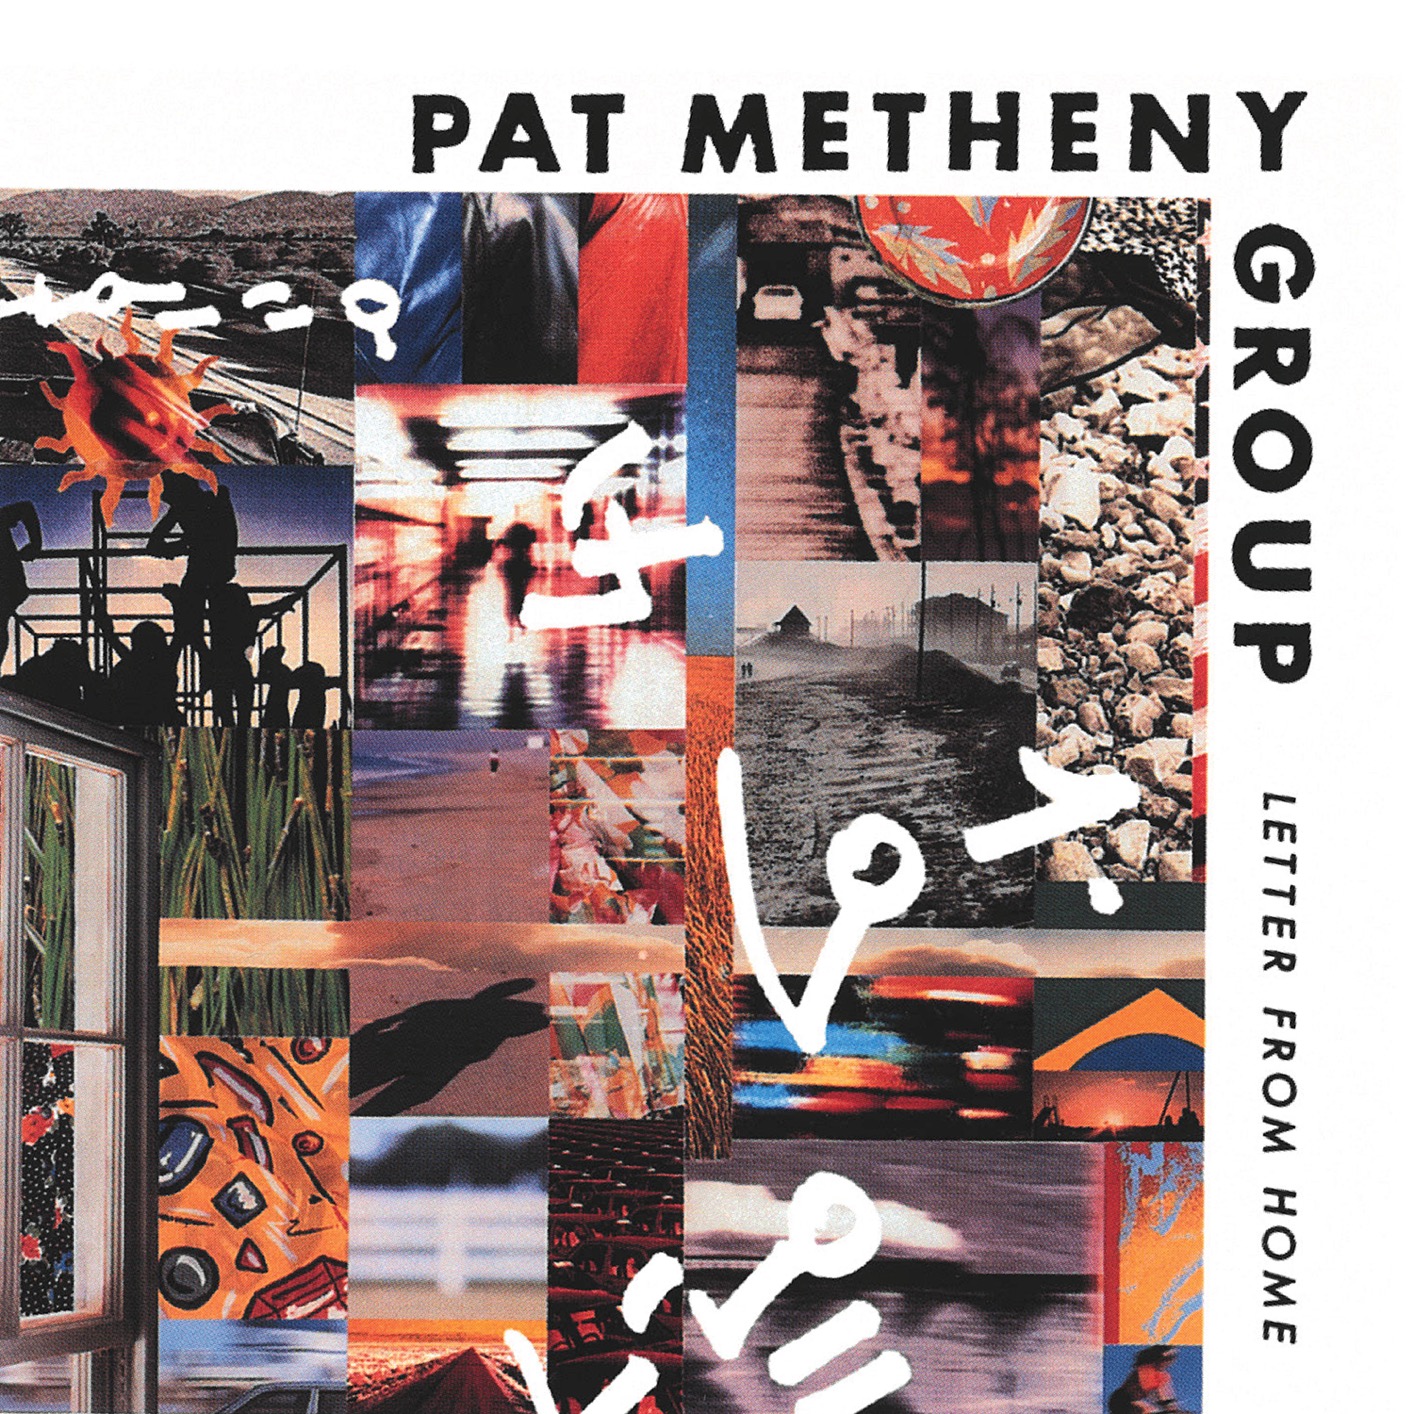 Pat Metheny Group – Letter from Home (1989/2018) [FLAC 24bit/44,1kHz]